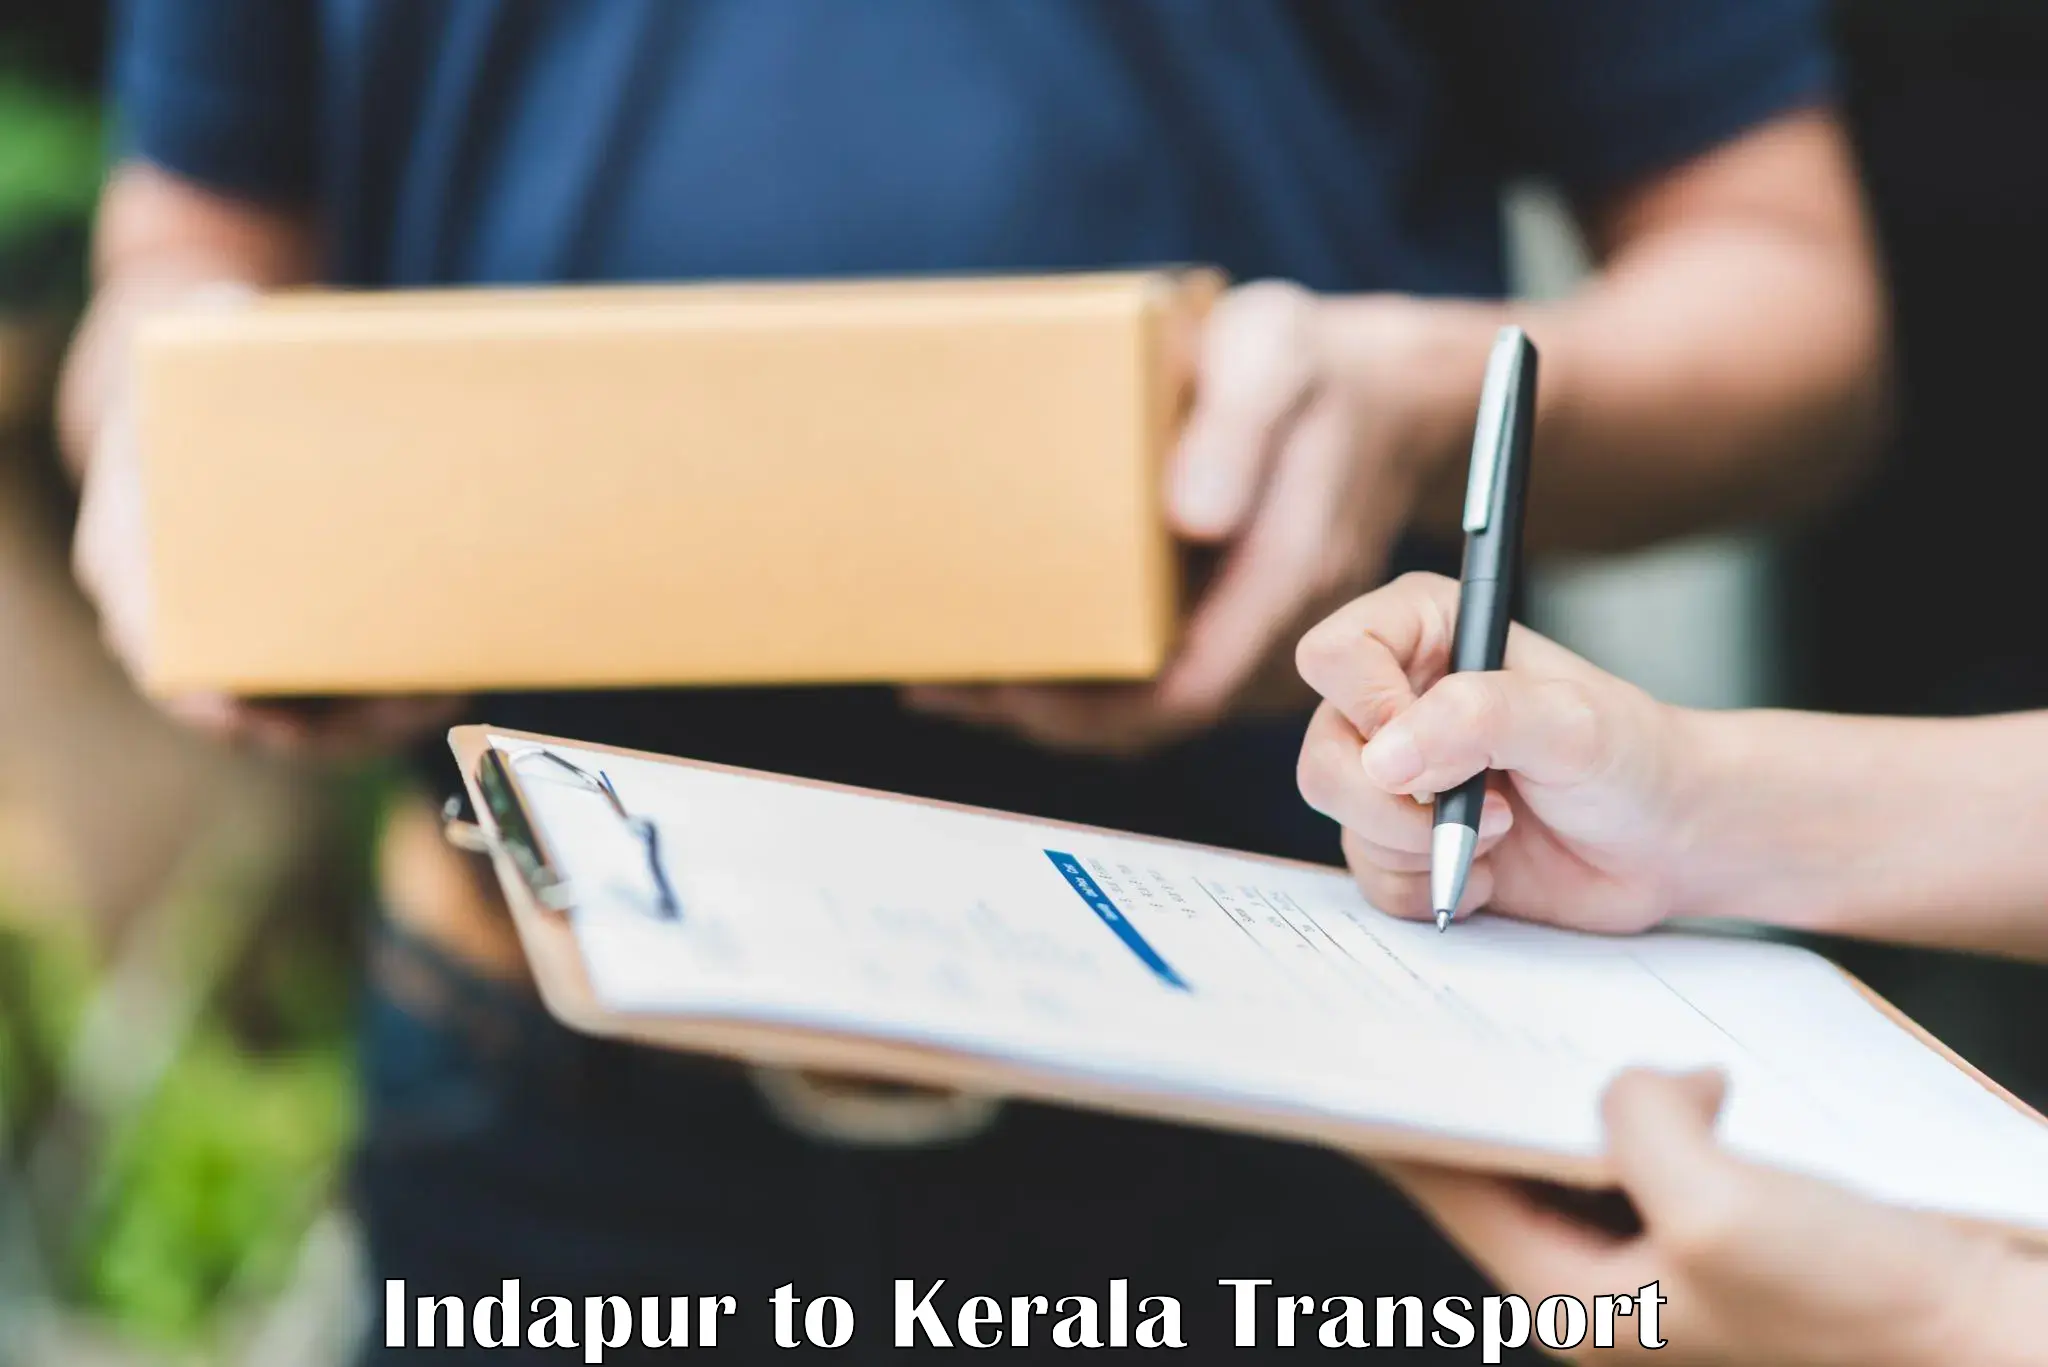 Delivery service Indapur to Kochi